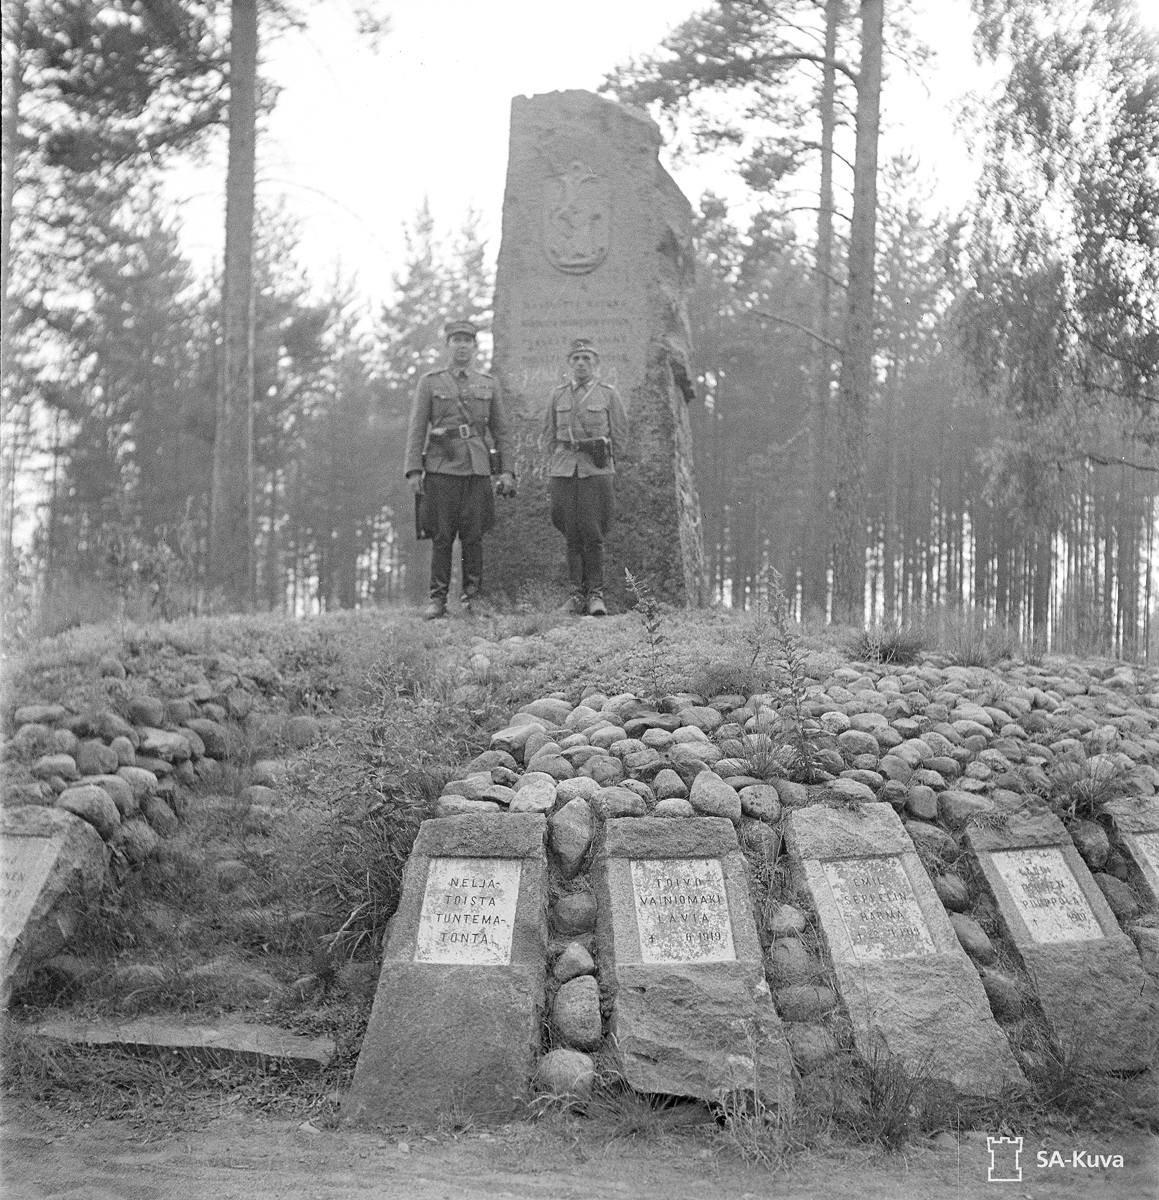 July 21, 1941. Tulema. Major General Paavo Talvela and Colonel Ruben Lagus near the Monument to the Fallen in Olonets expedition